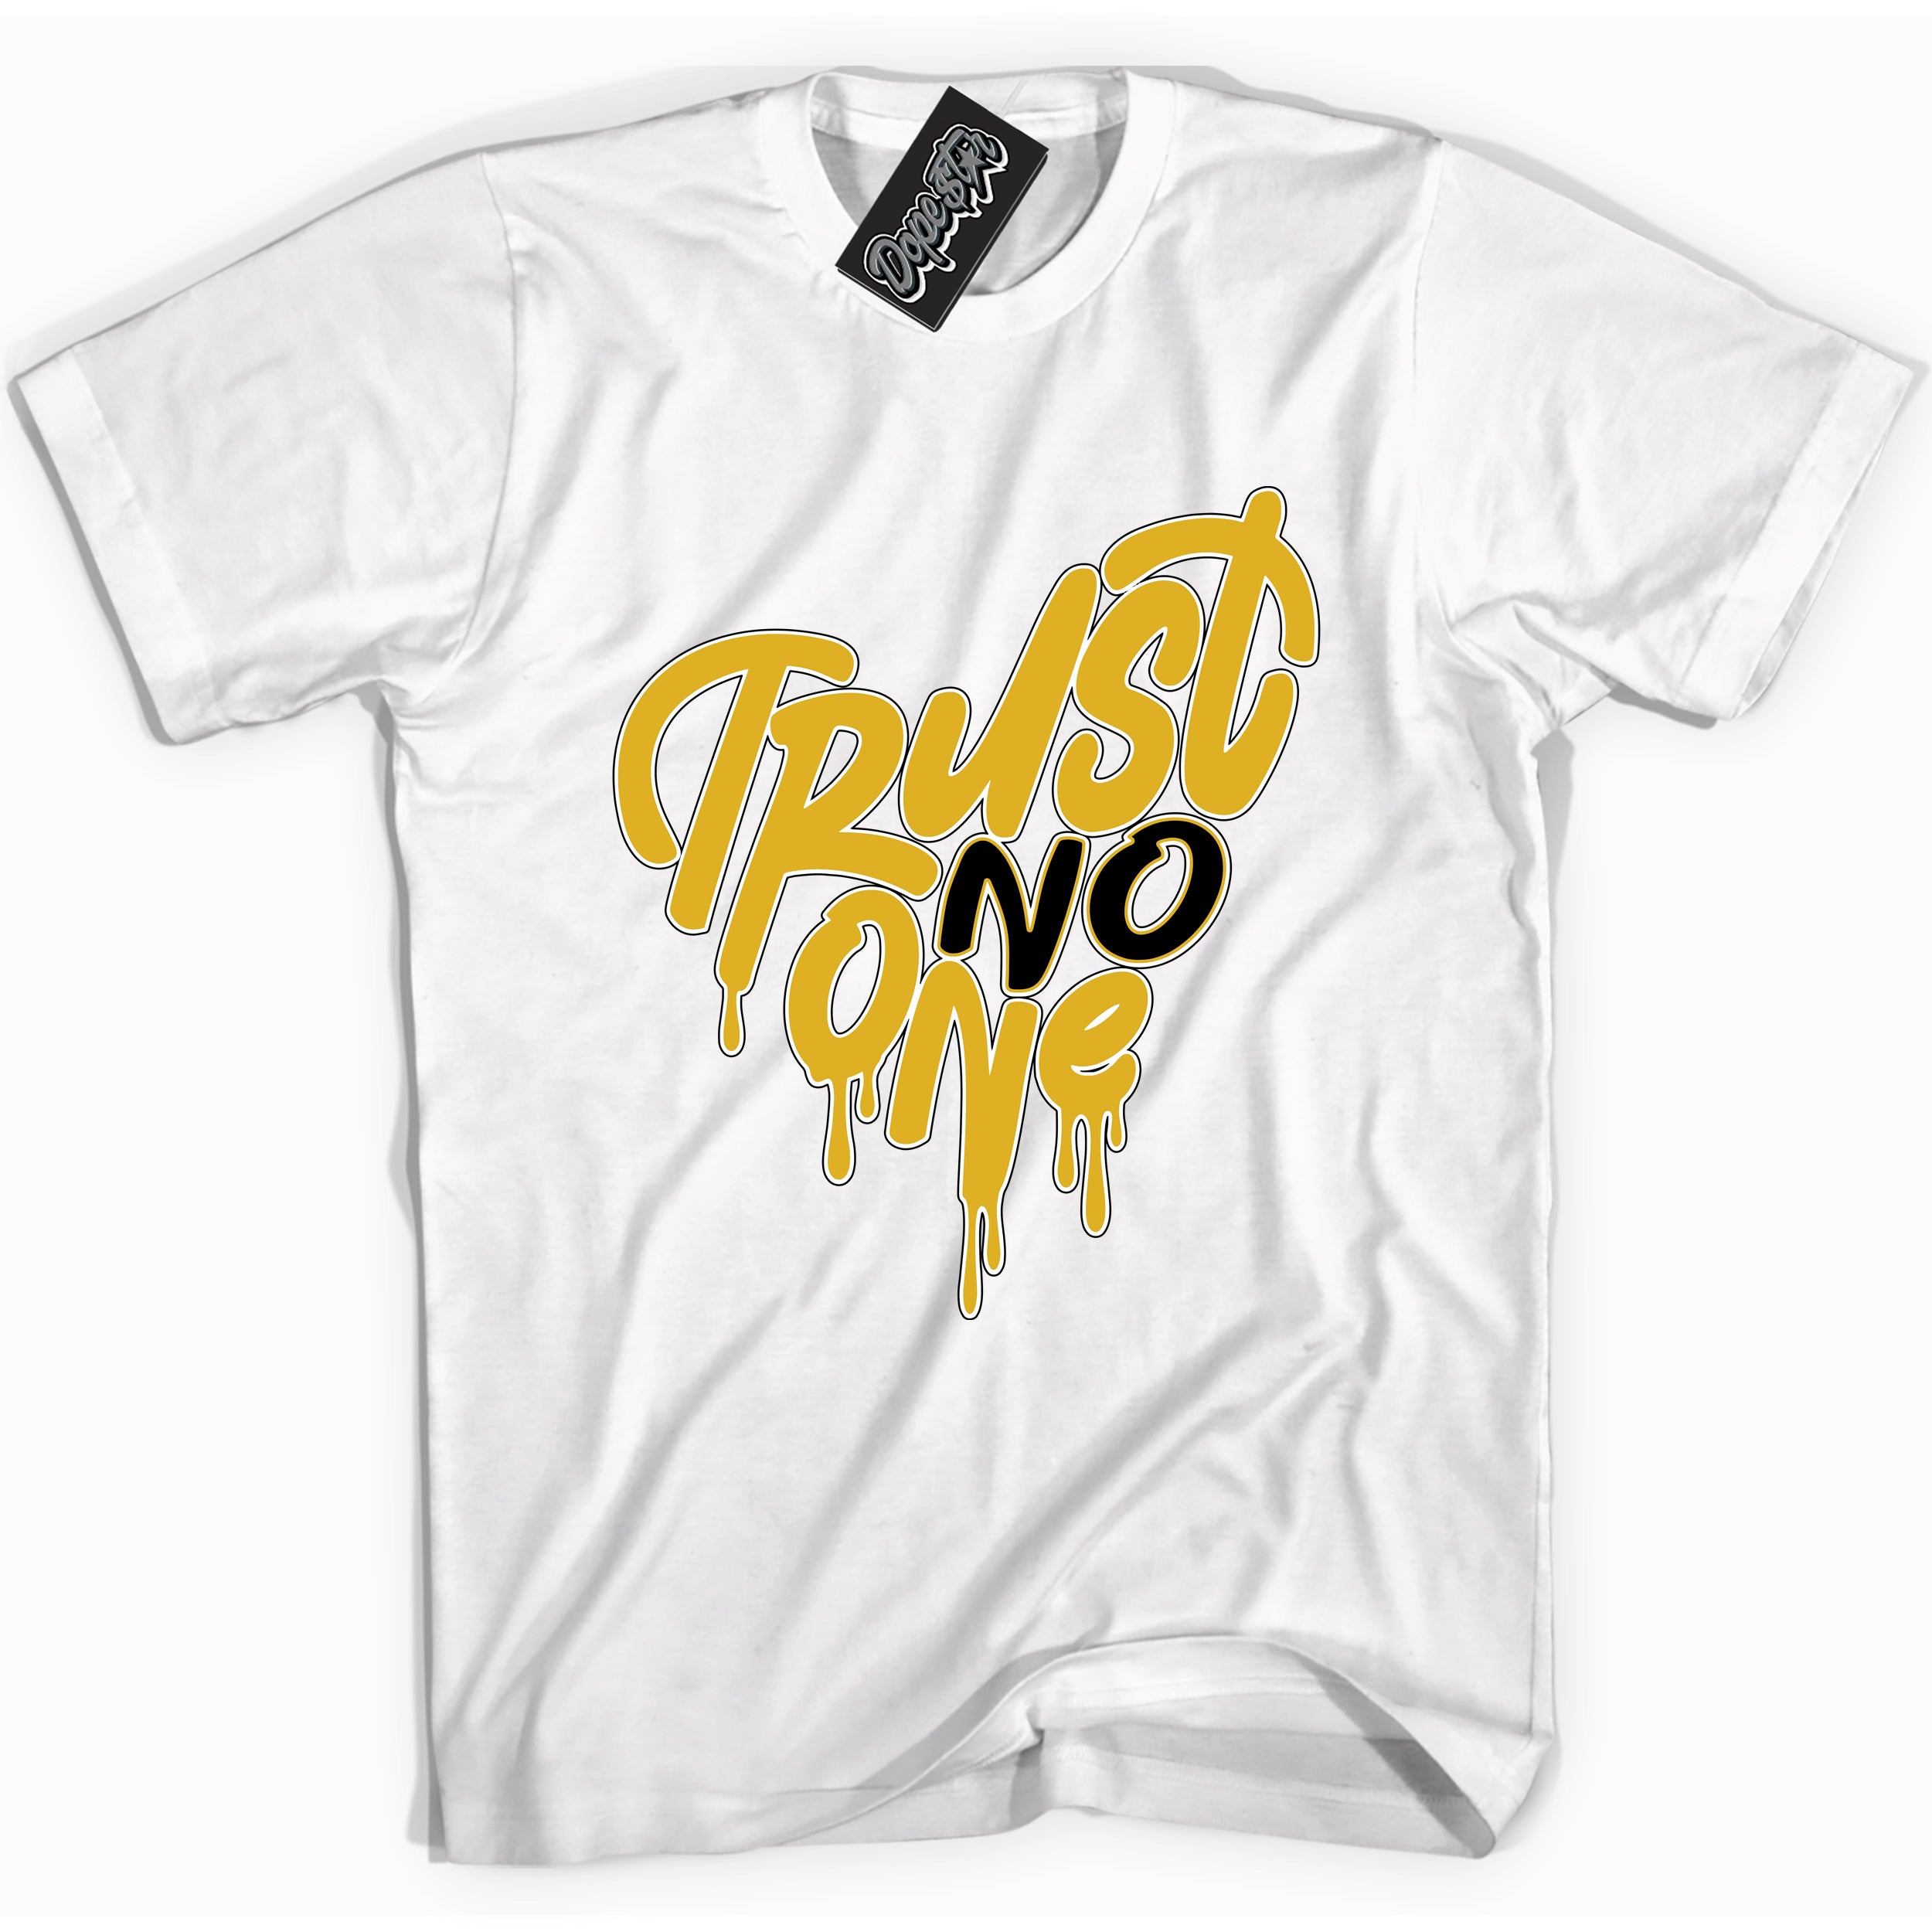 Cool White Shirt with “ Trust No One Heart” design that perfectly matches Yellow Ochre 6s Sneakers.